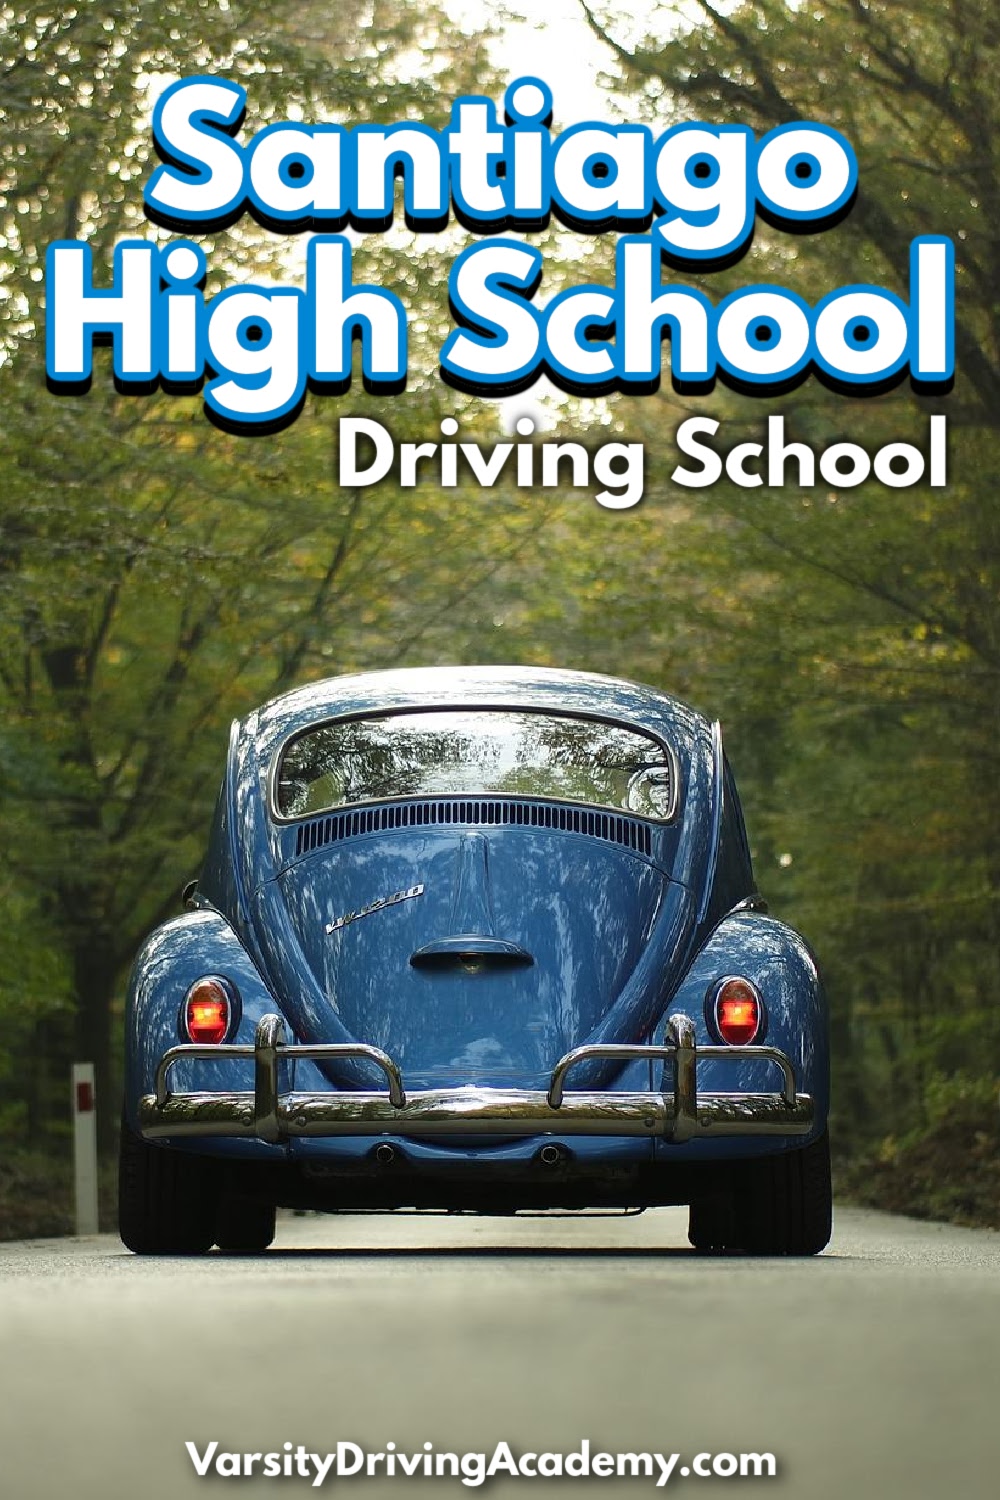 The best Santiago High School driving school is Varsity Driving Academy where success is the goal and safety is the priority.